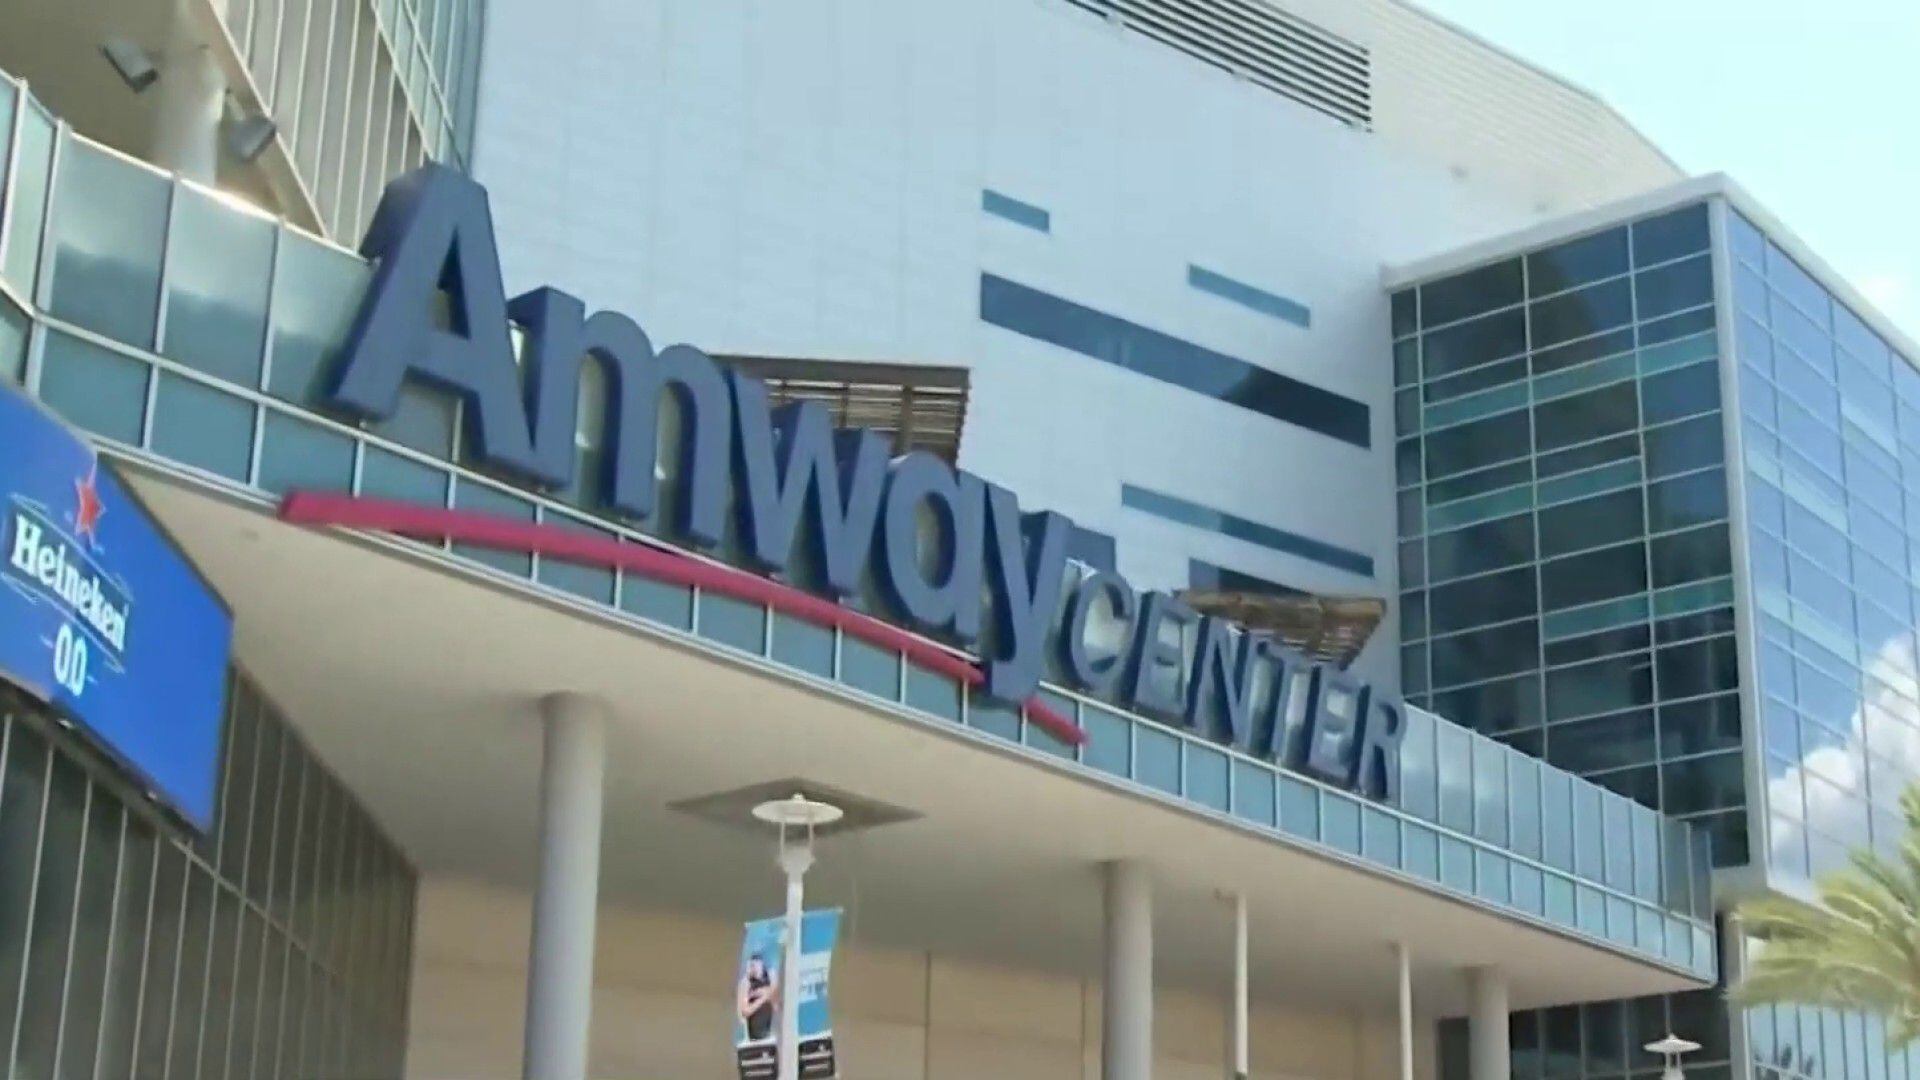 Here’s a full list of concerts left in 2022 at Amway Center, Camping World Stadium